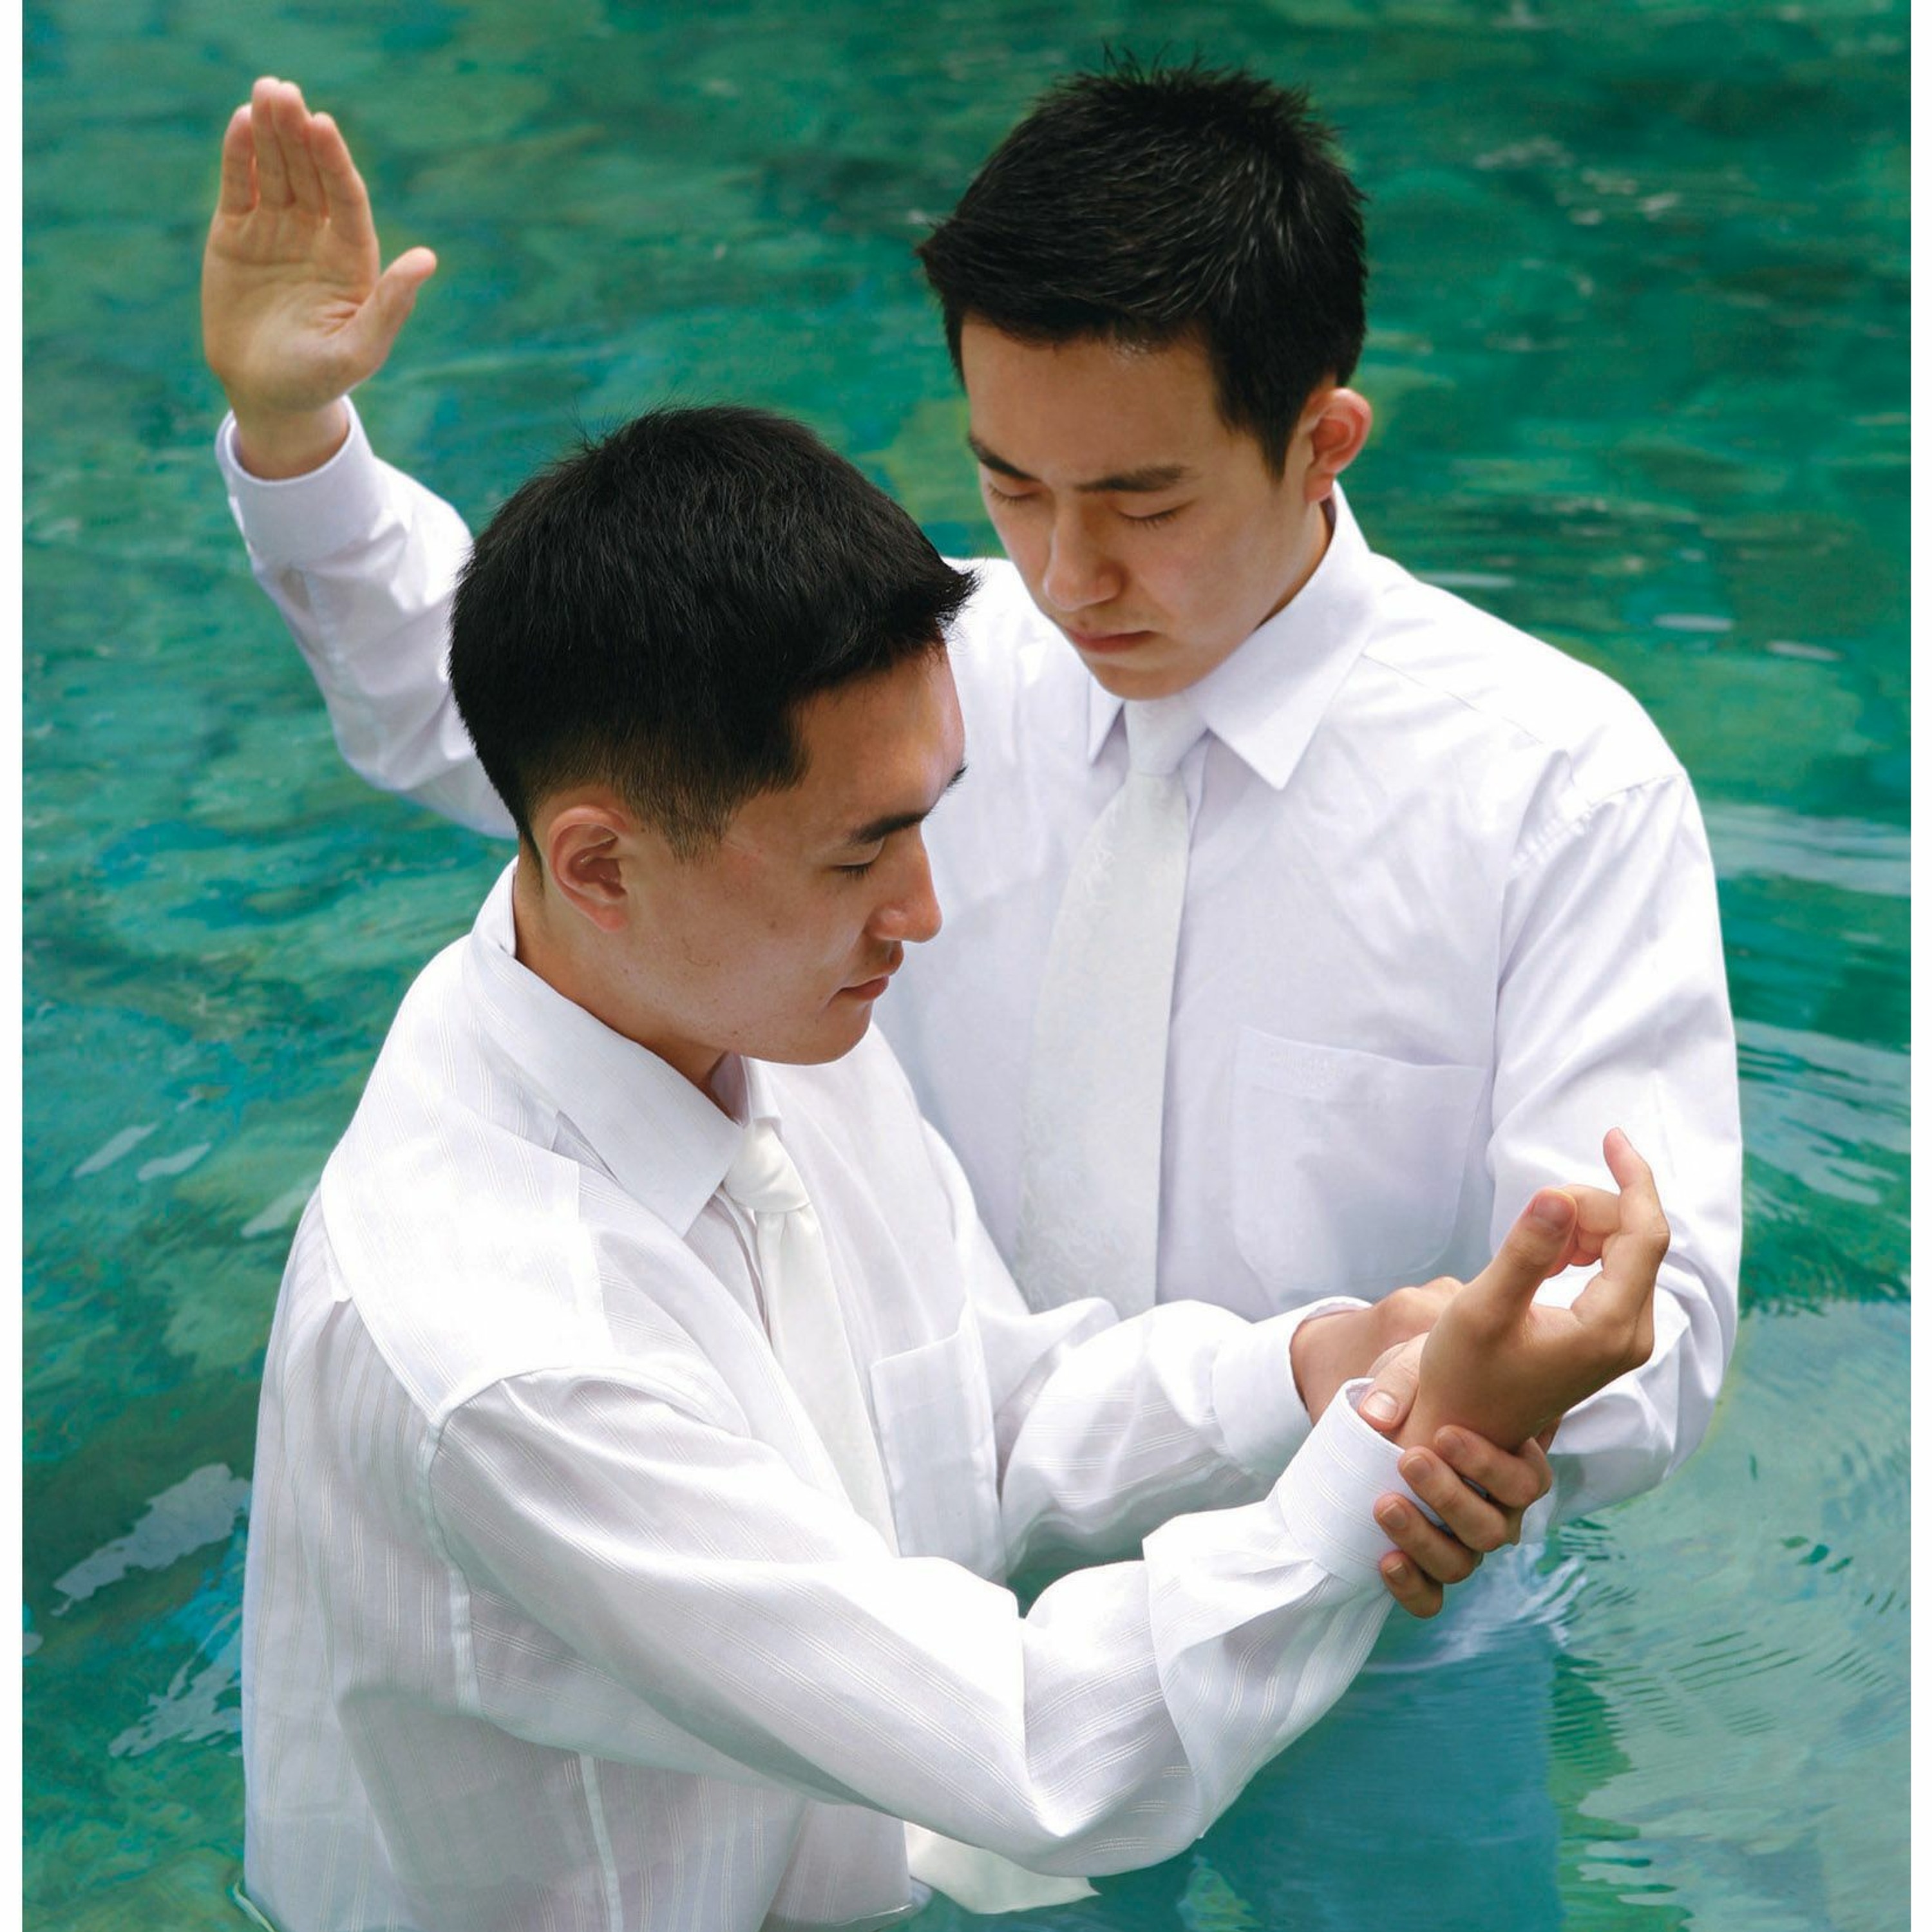 What the Book of Mormon teaches about baptism (beyond what the New Testament teaches)